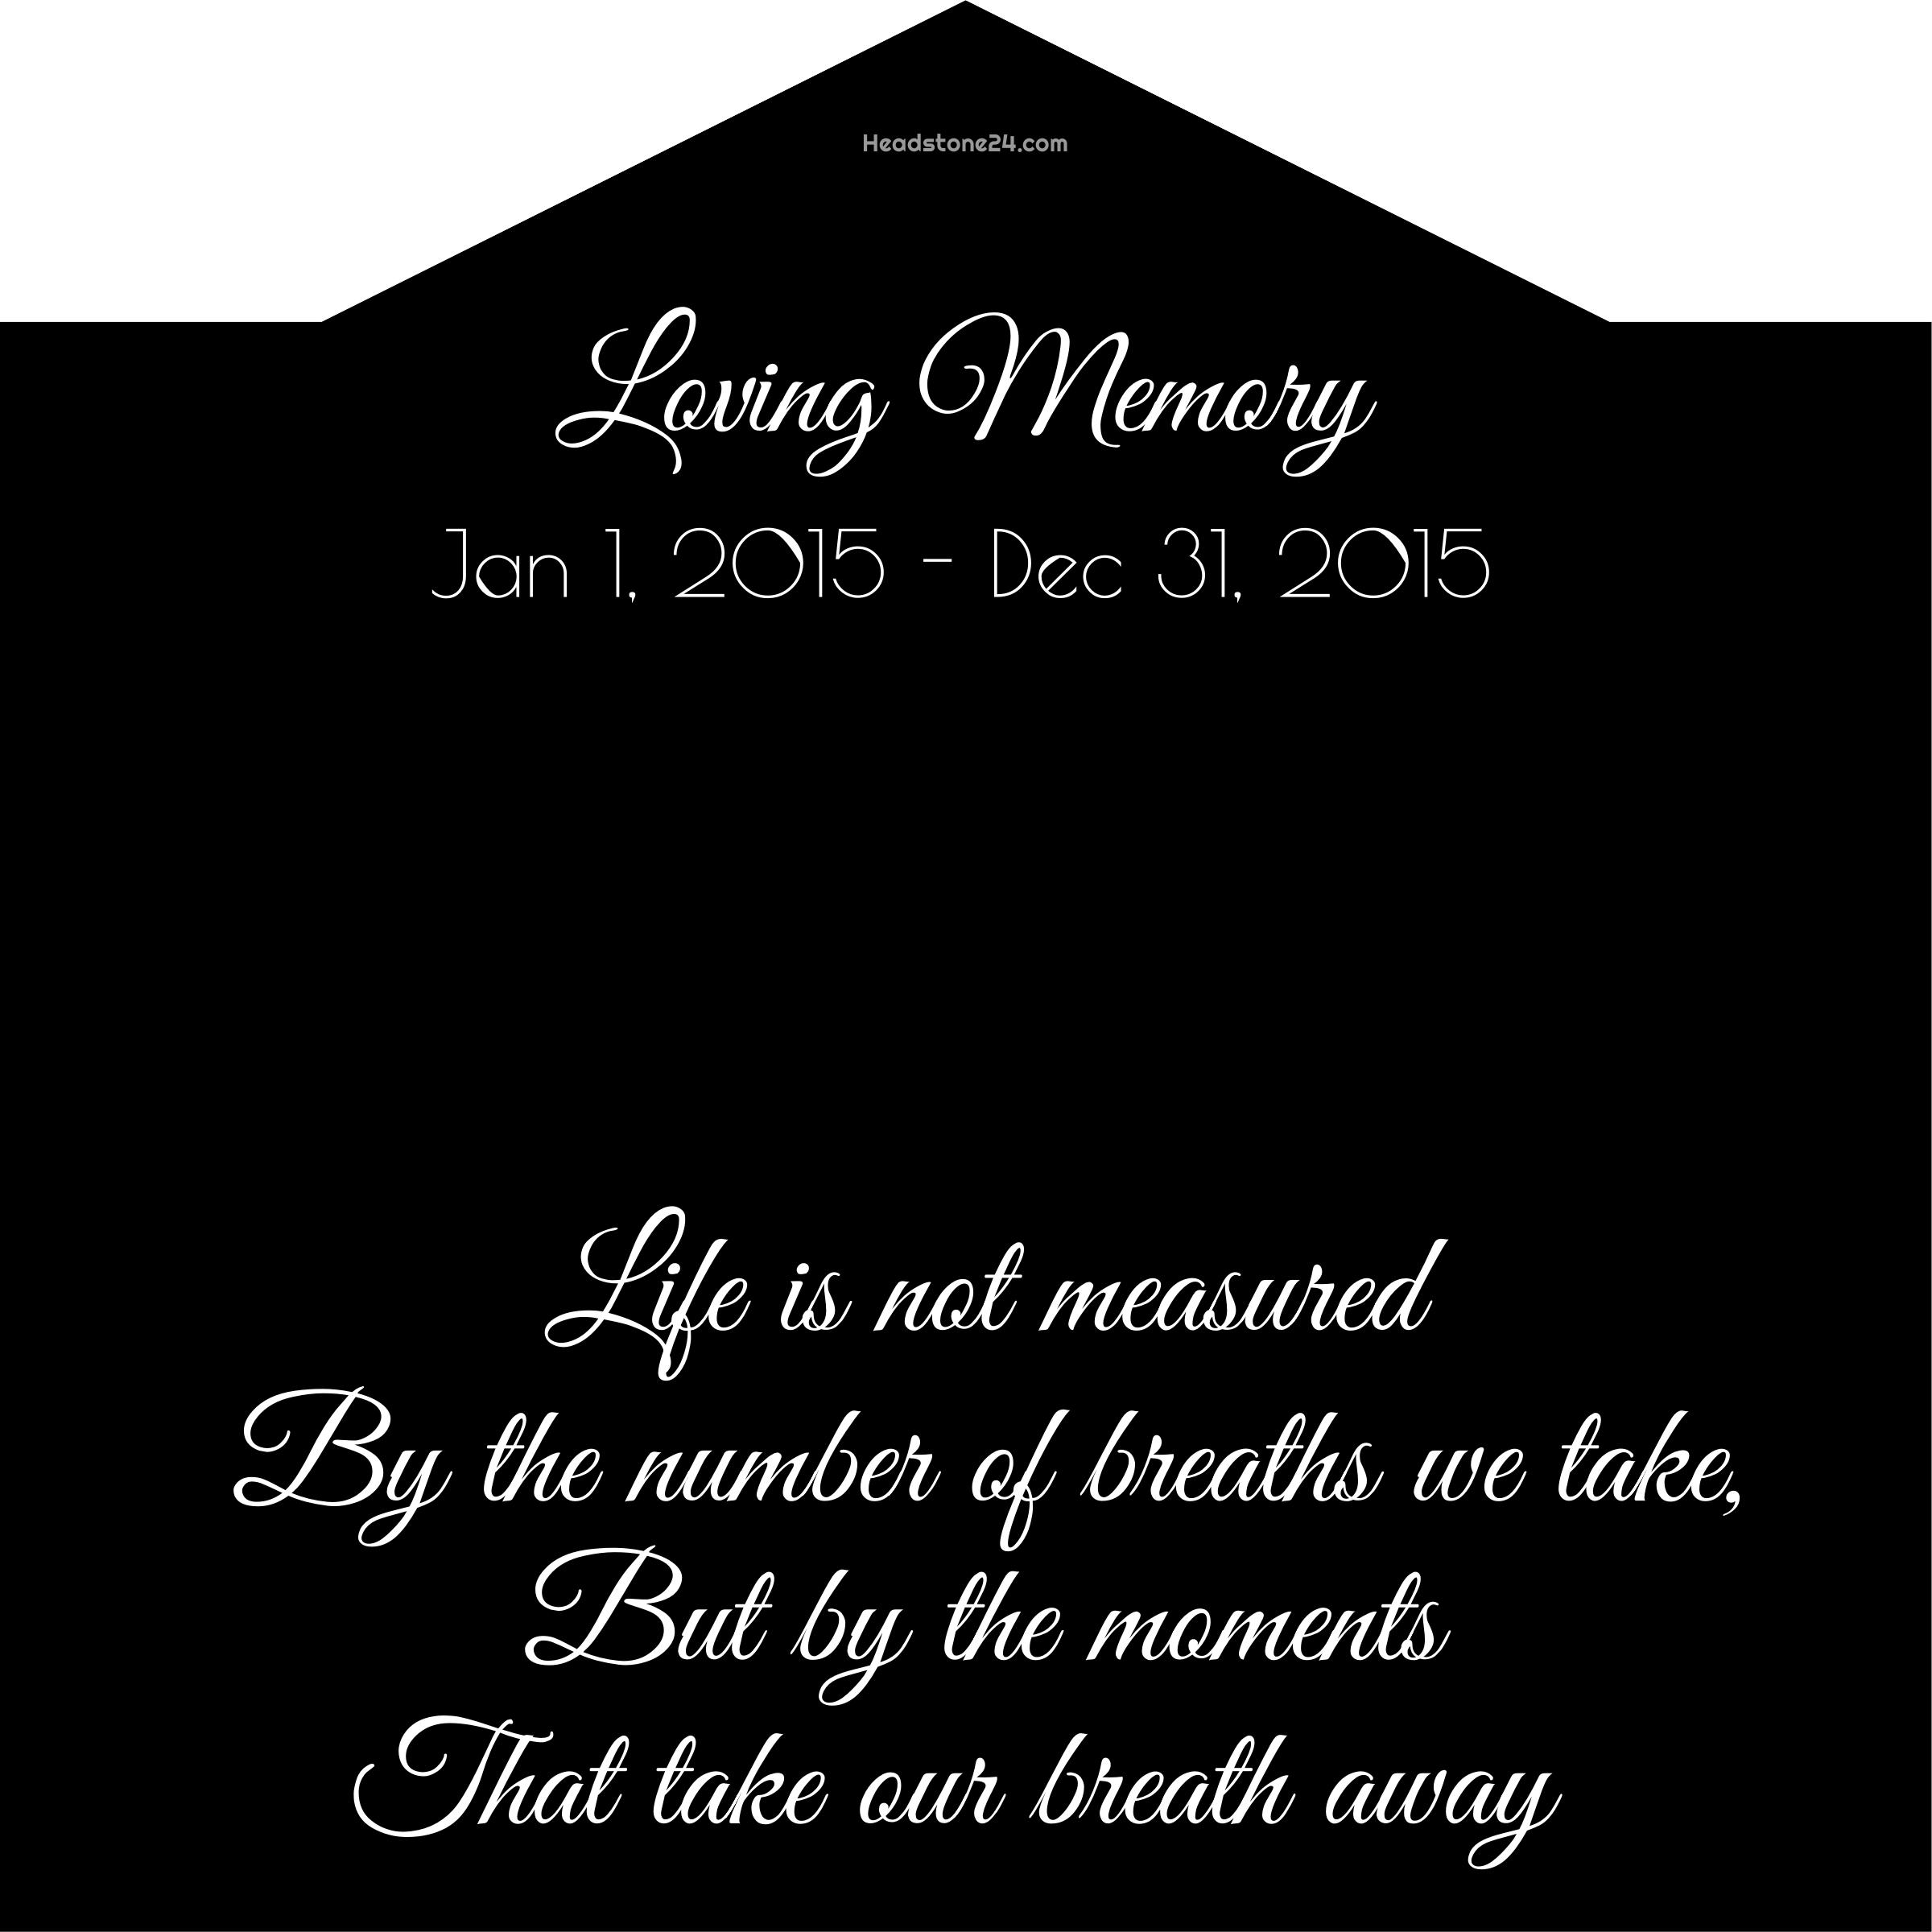 Headstone Design #2 png